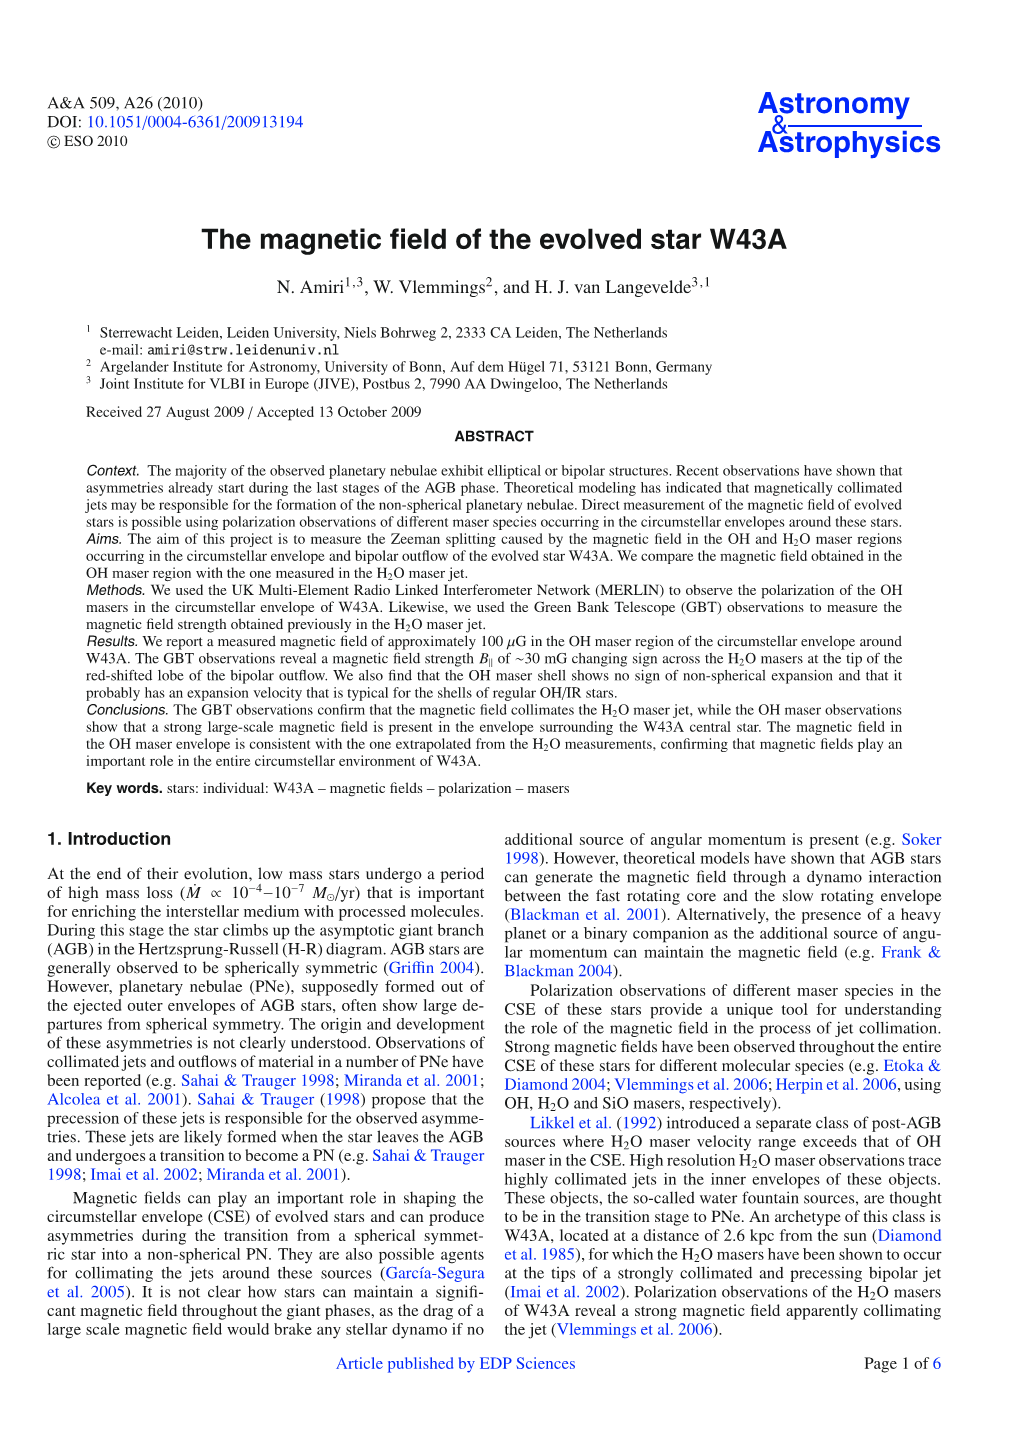 The Magnetic Field of the Evolved Star W43A